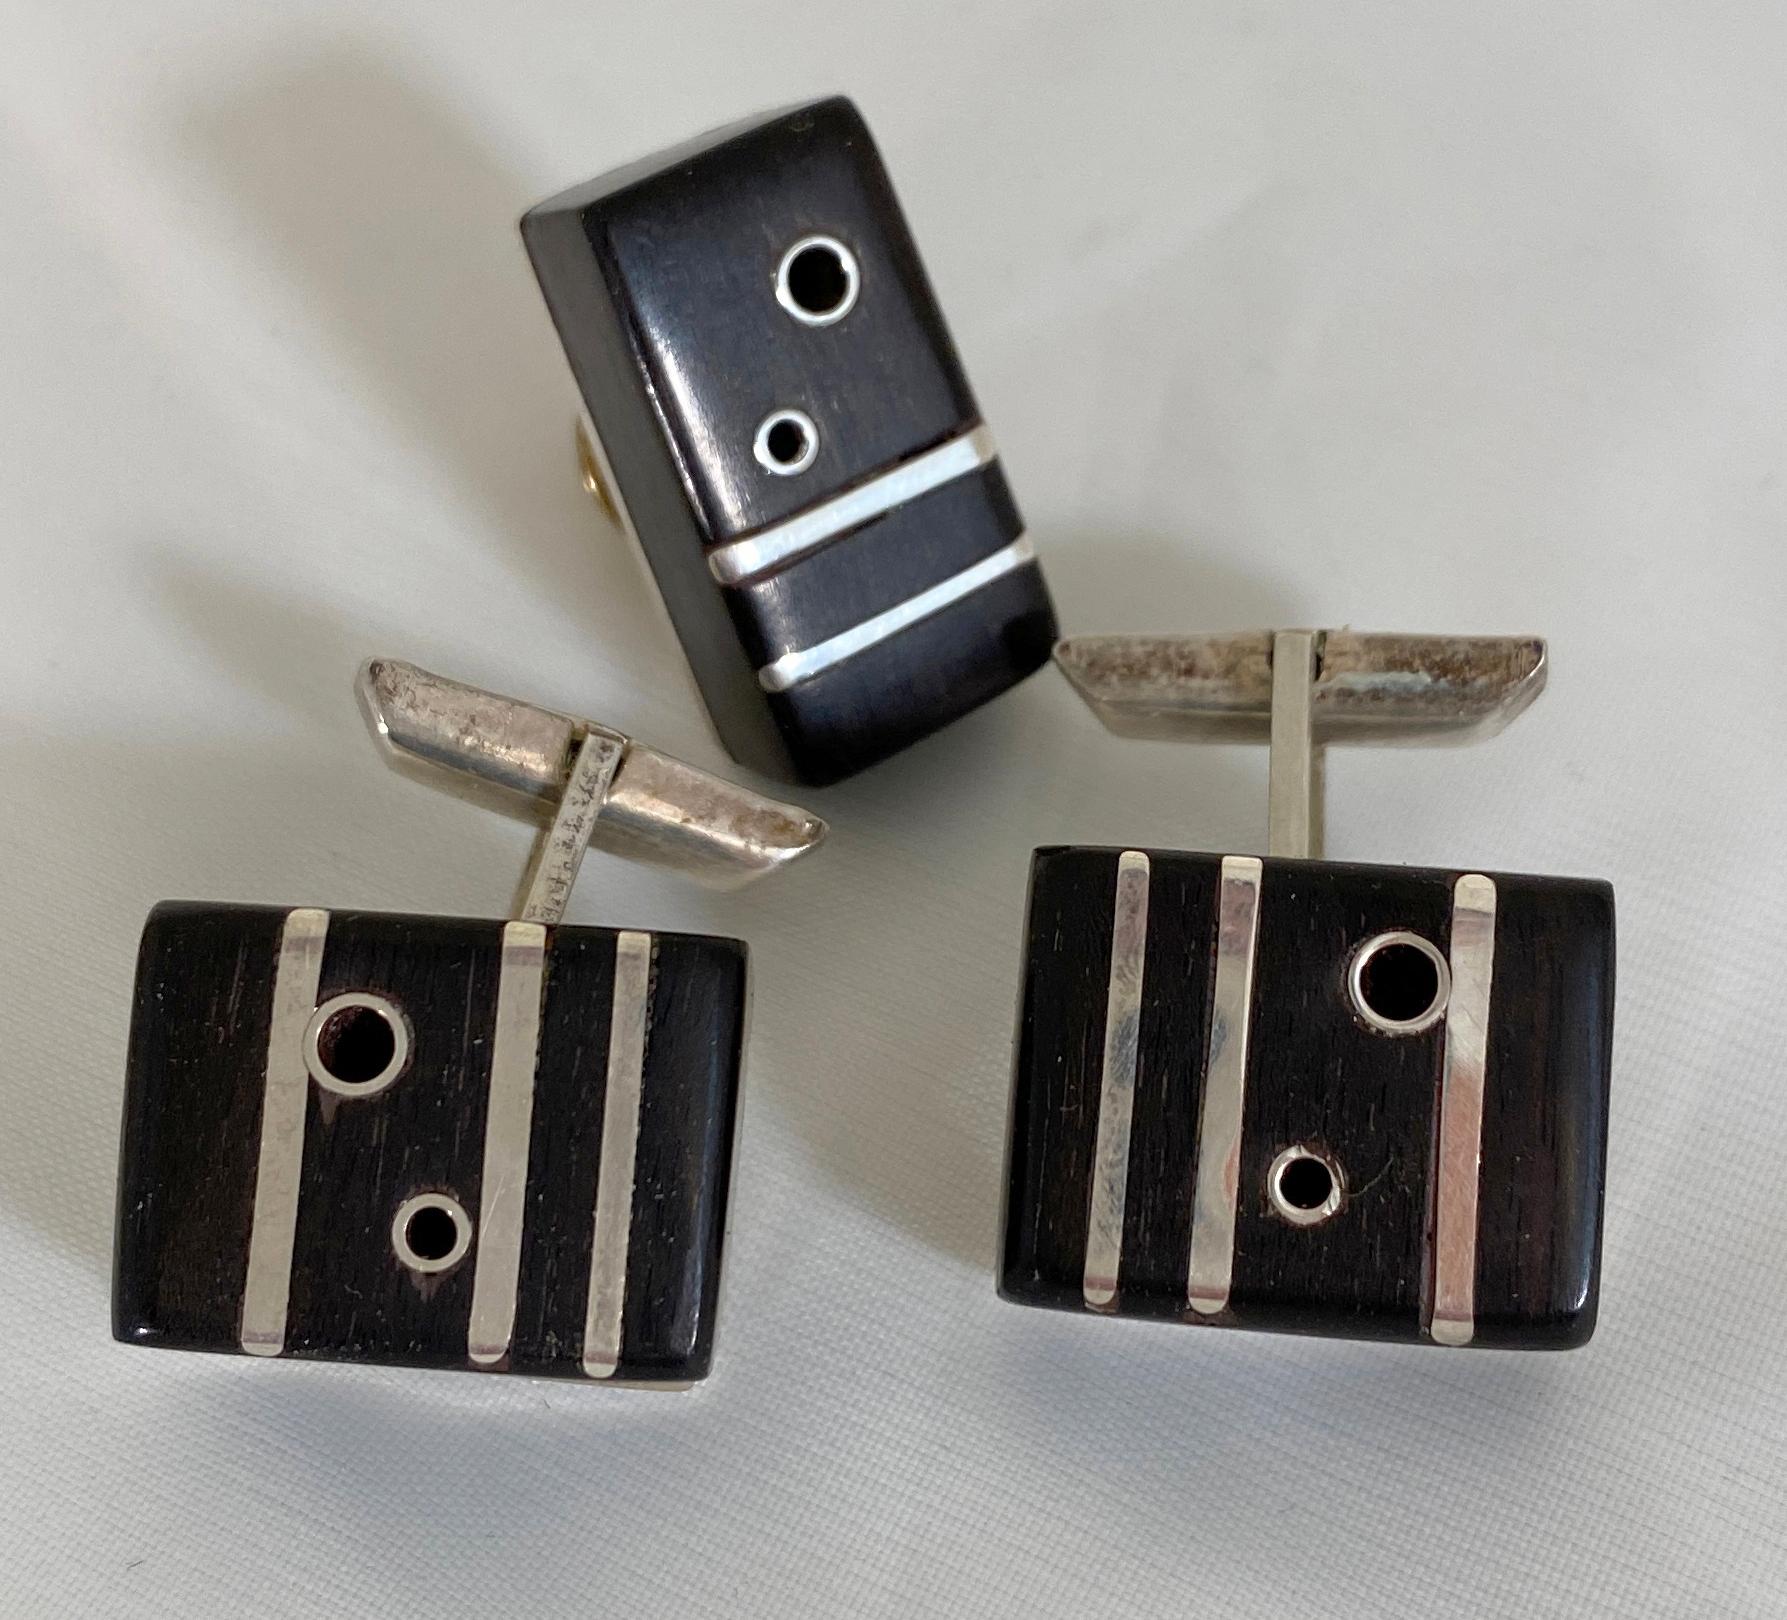 Rare and early work by Mildred Ball, these cufflinks and tie pin were purchased in Winston-Salem where Mildred got her start. The 